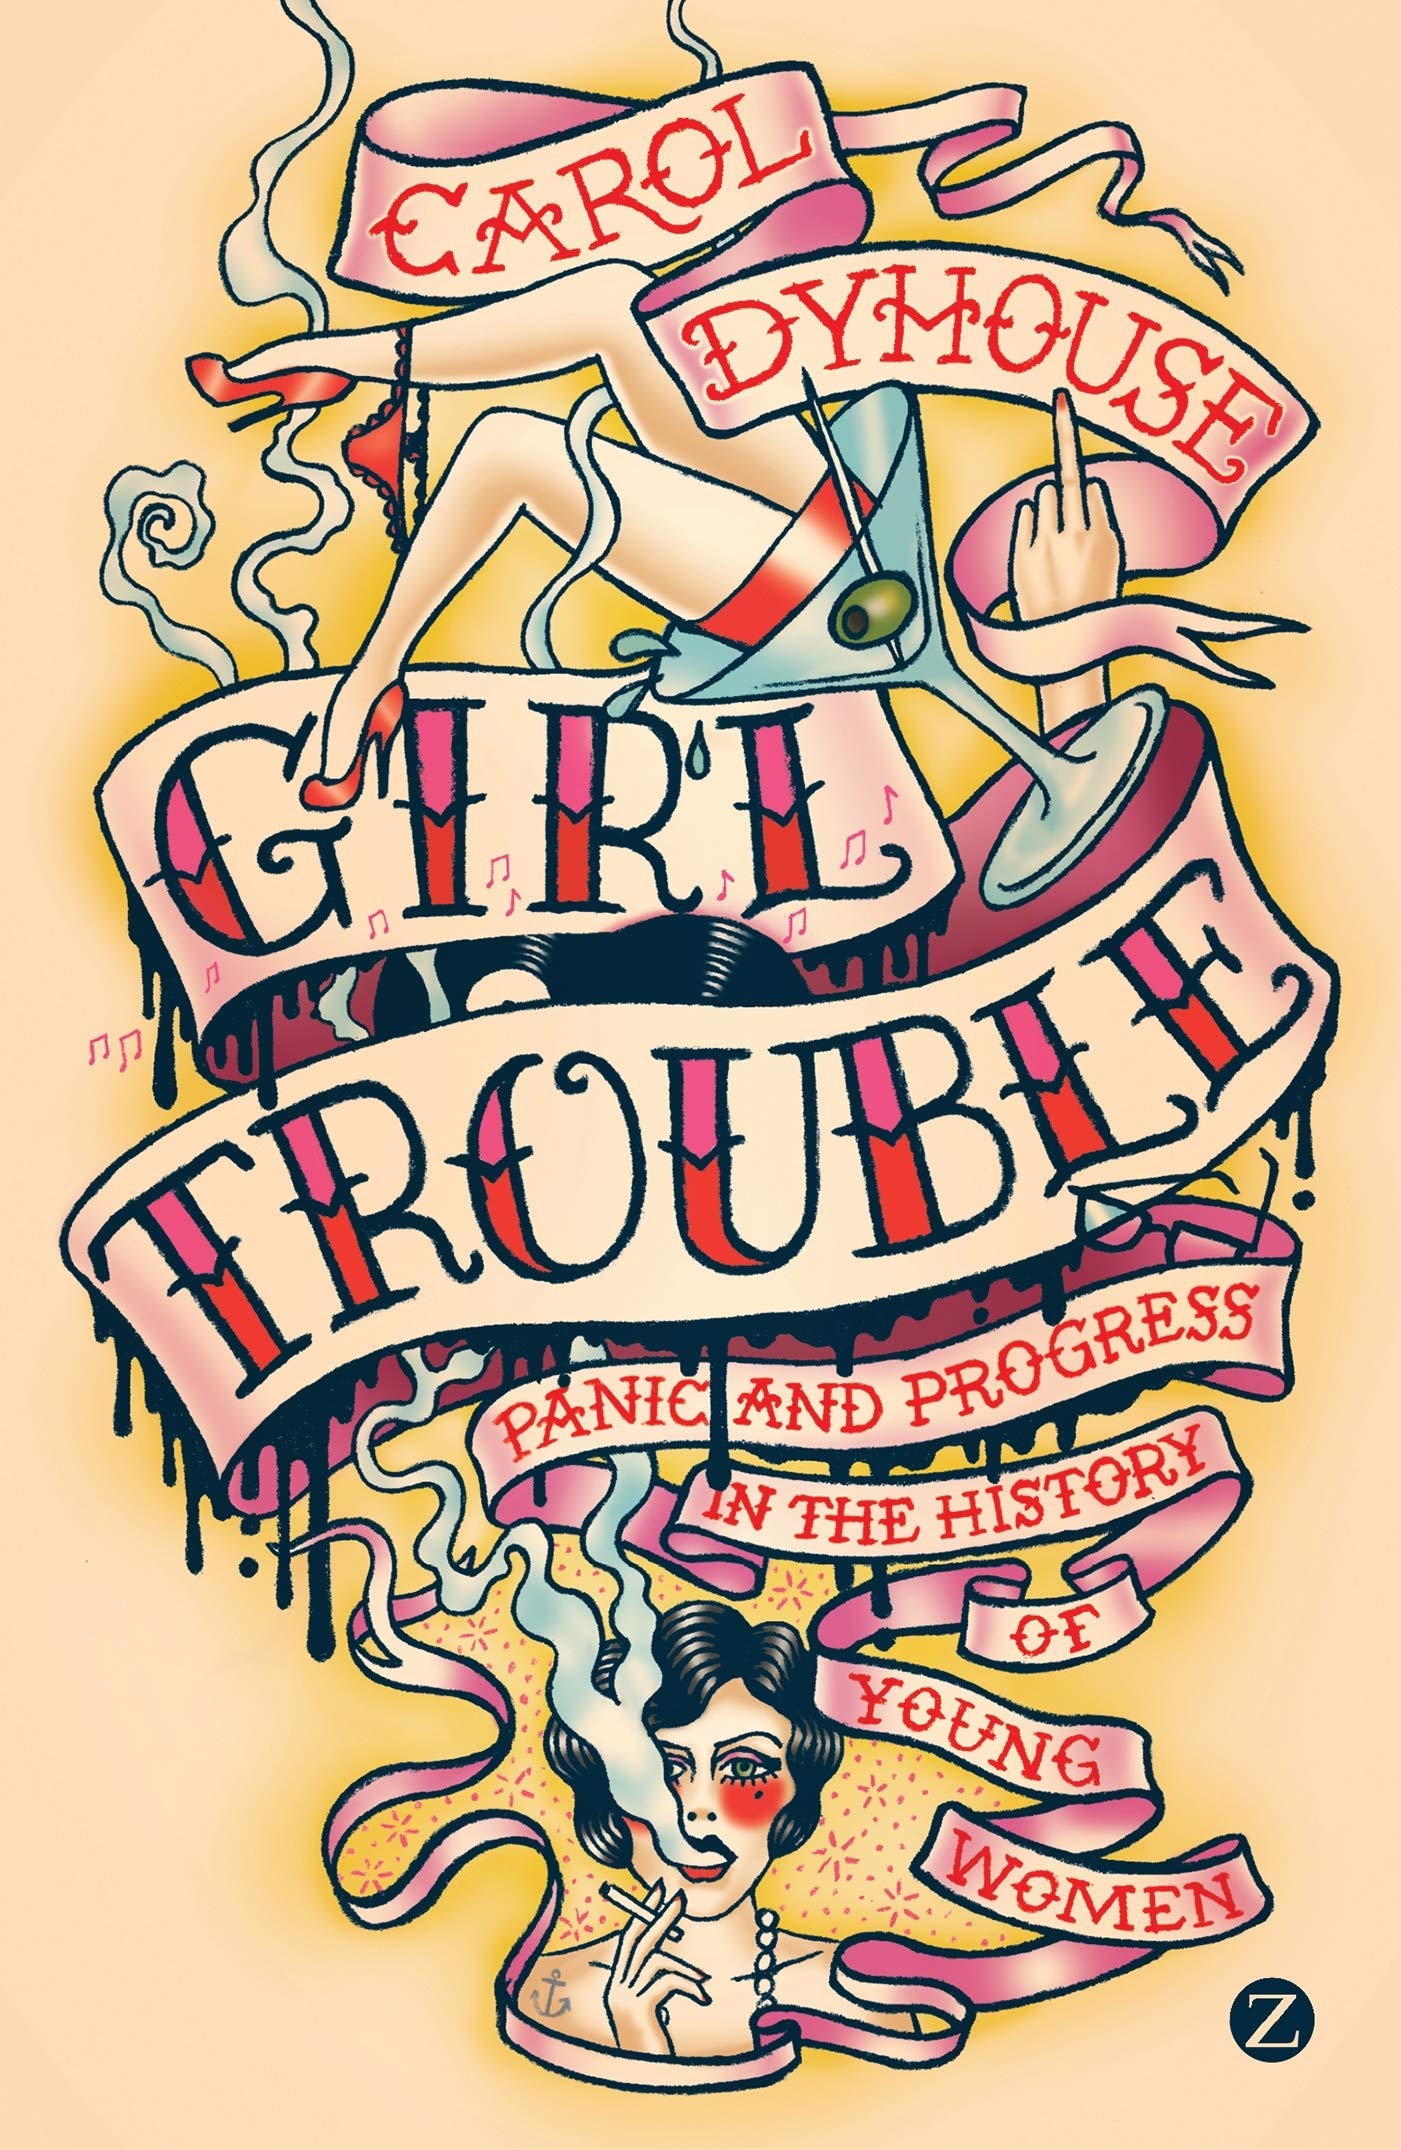 Girl Trouble: Panic and Progress in the History of Young Women by Carol Dyhouse.